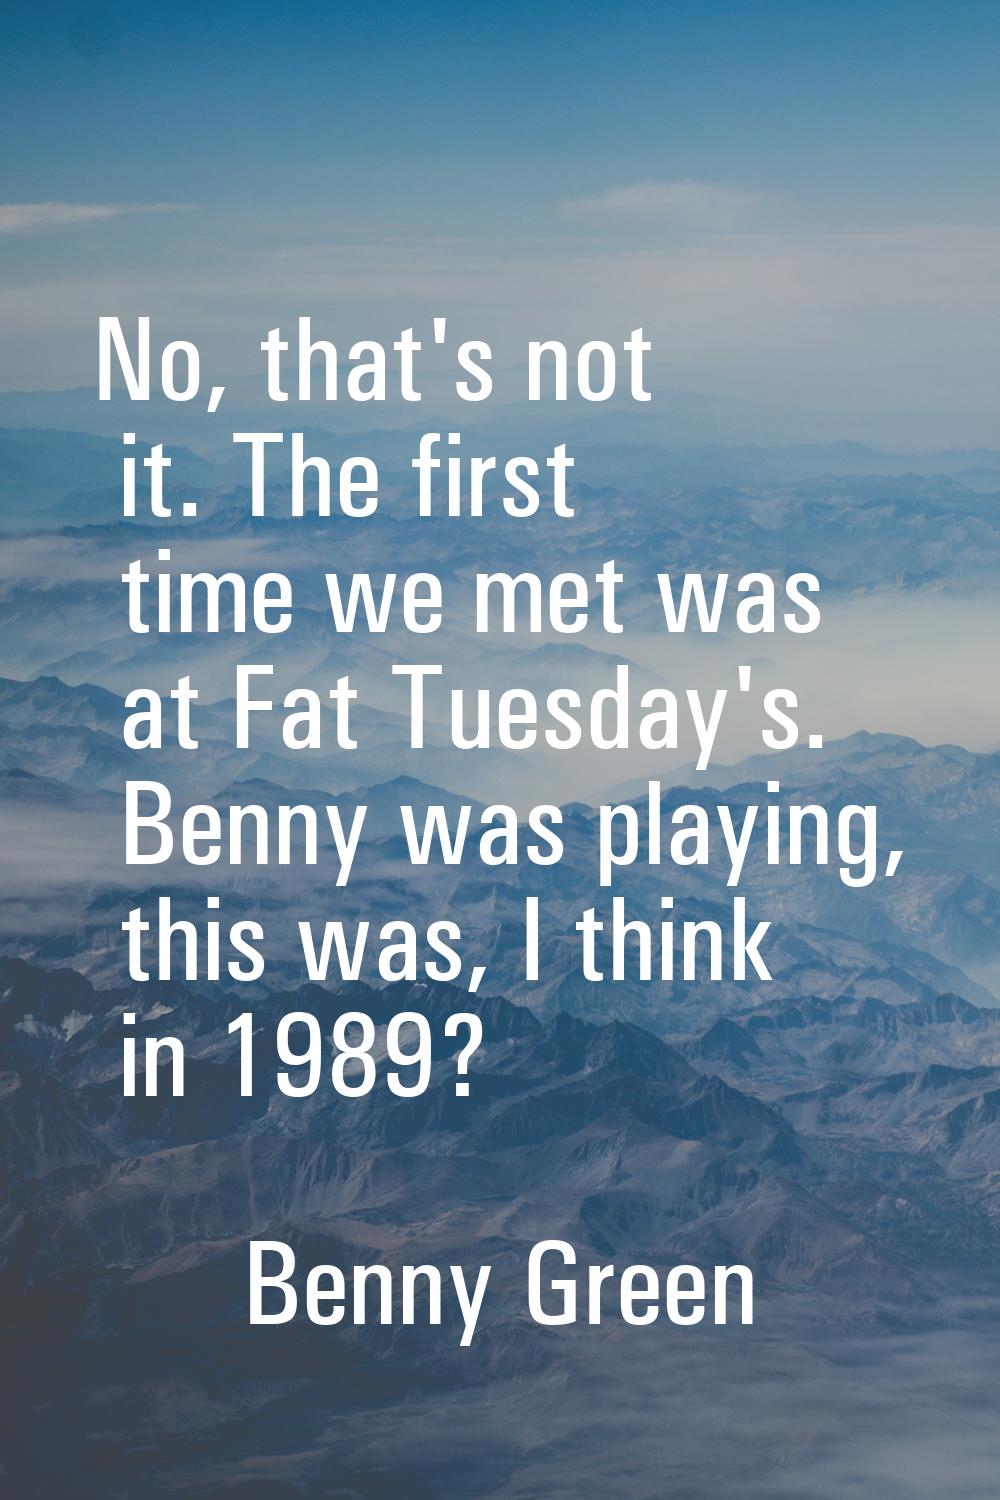 No, that's not it. The first time we met was at Fat Tuesday's. Benny was playing, this was, I think